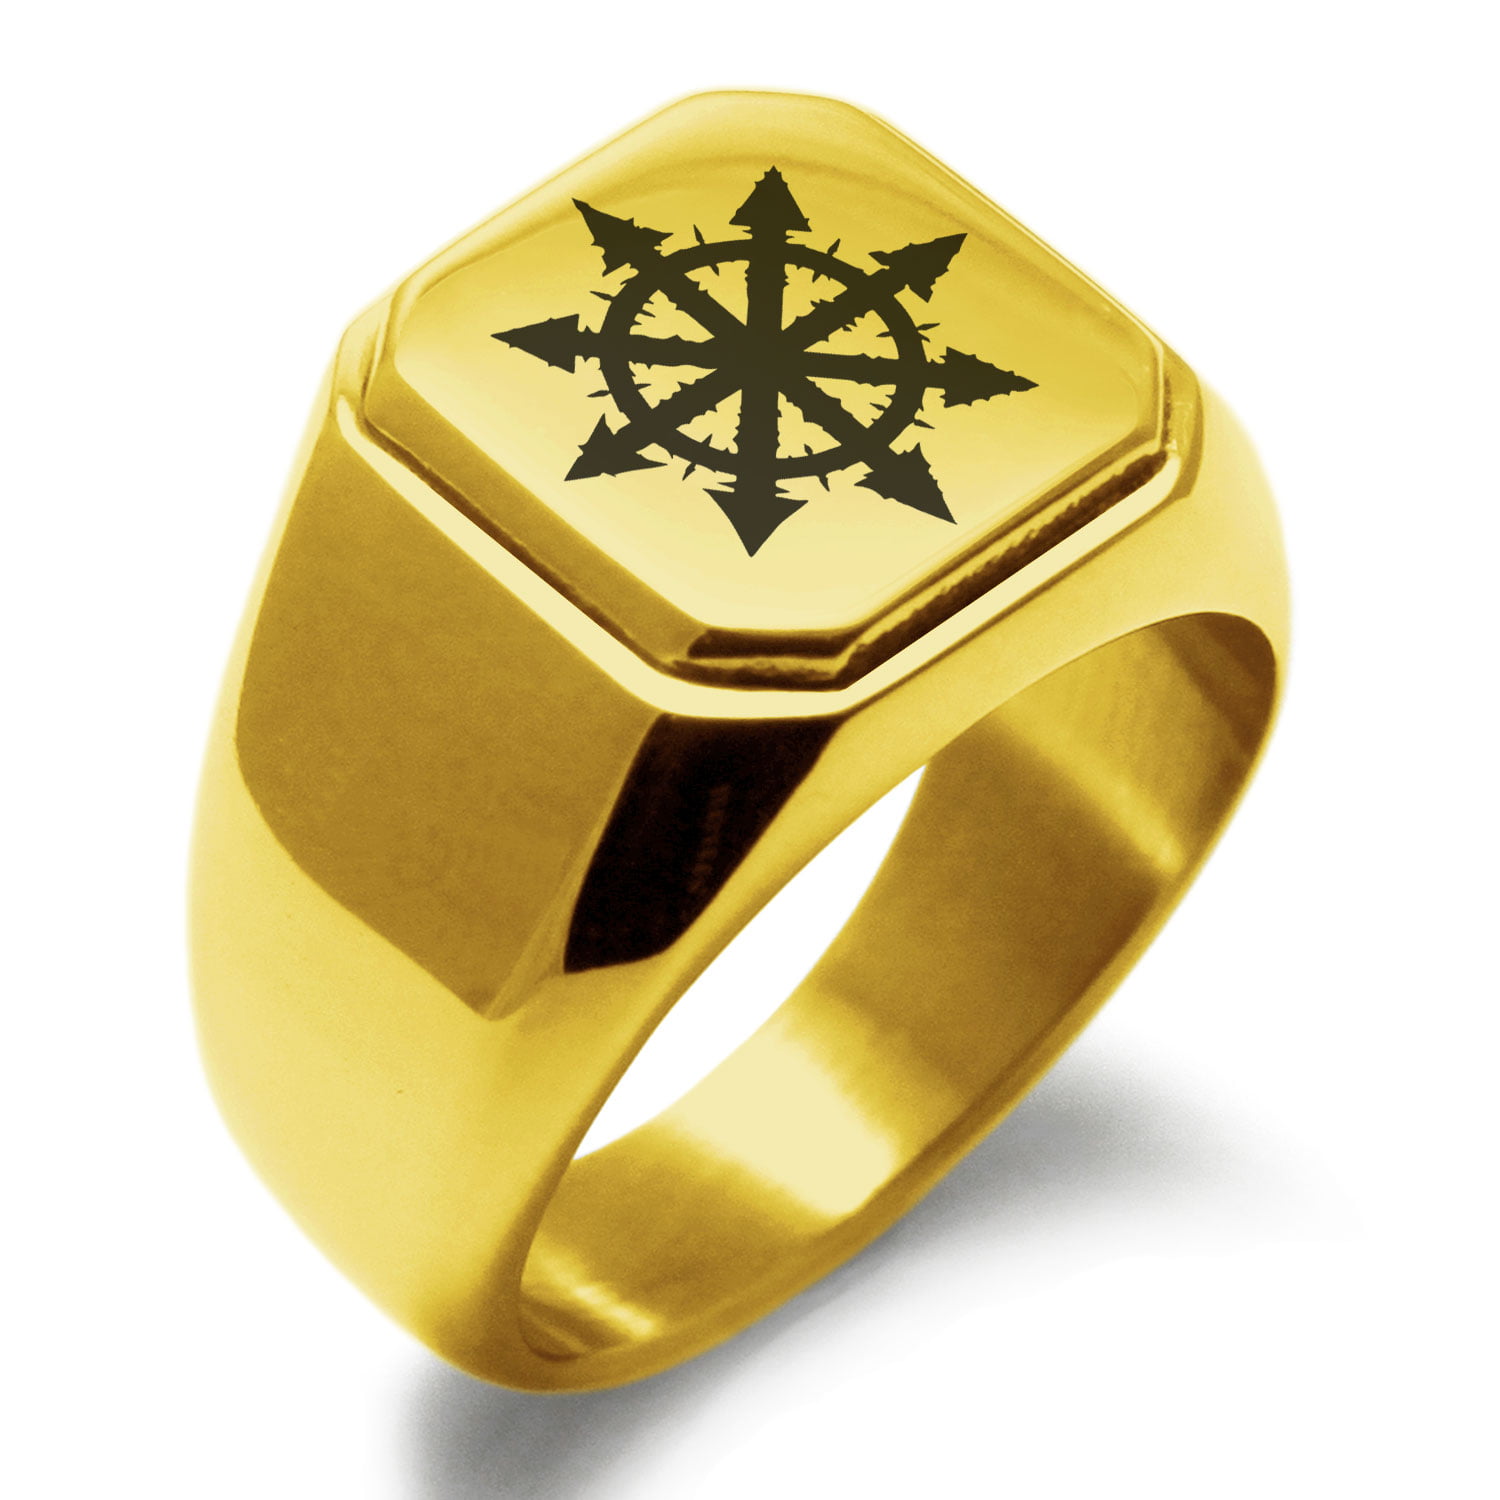 Stainless Steel Chaos Symbol Square Flat Top Biker Style Polished Ring 